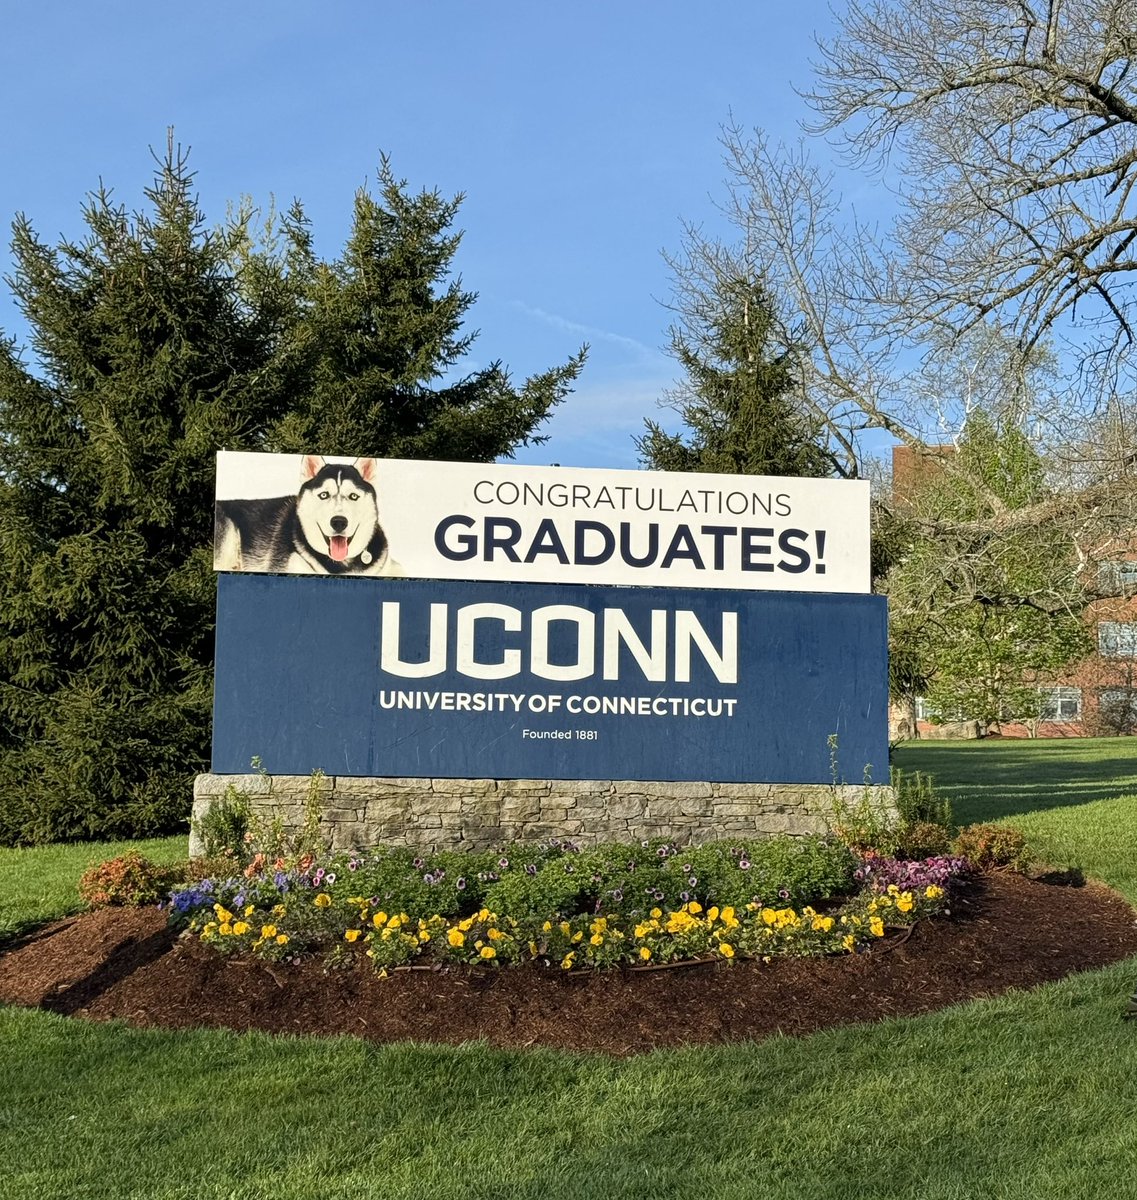 Beautiful Day in Storrs. Big Time Recruits on campus. Let’s Go‼️@UConnFootball